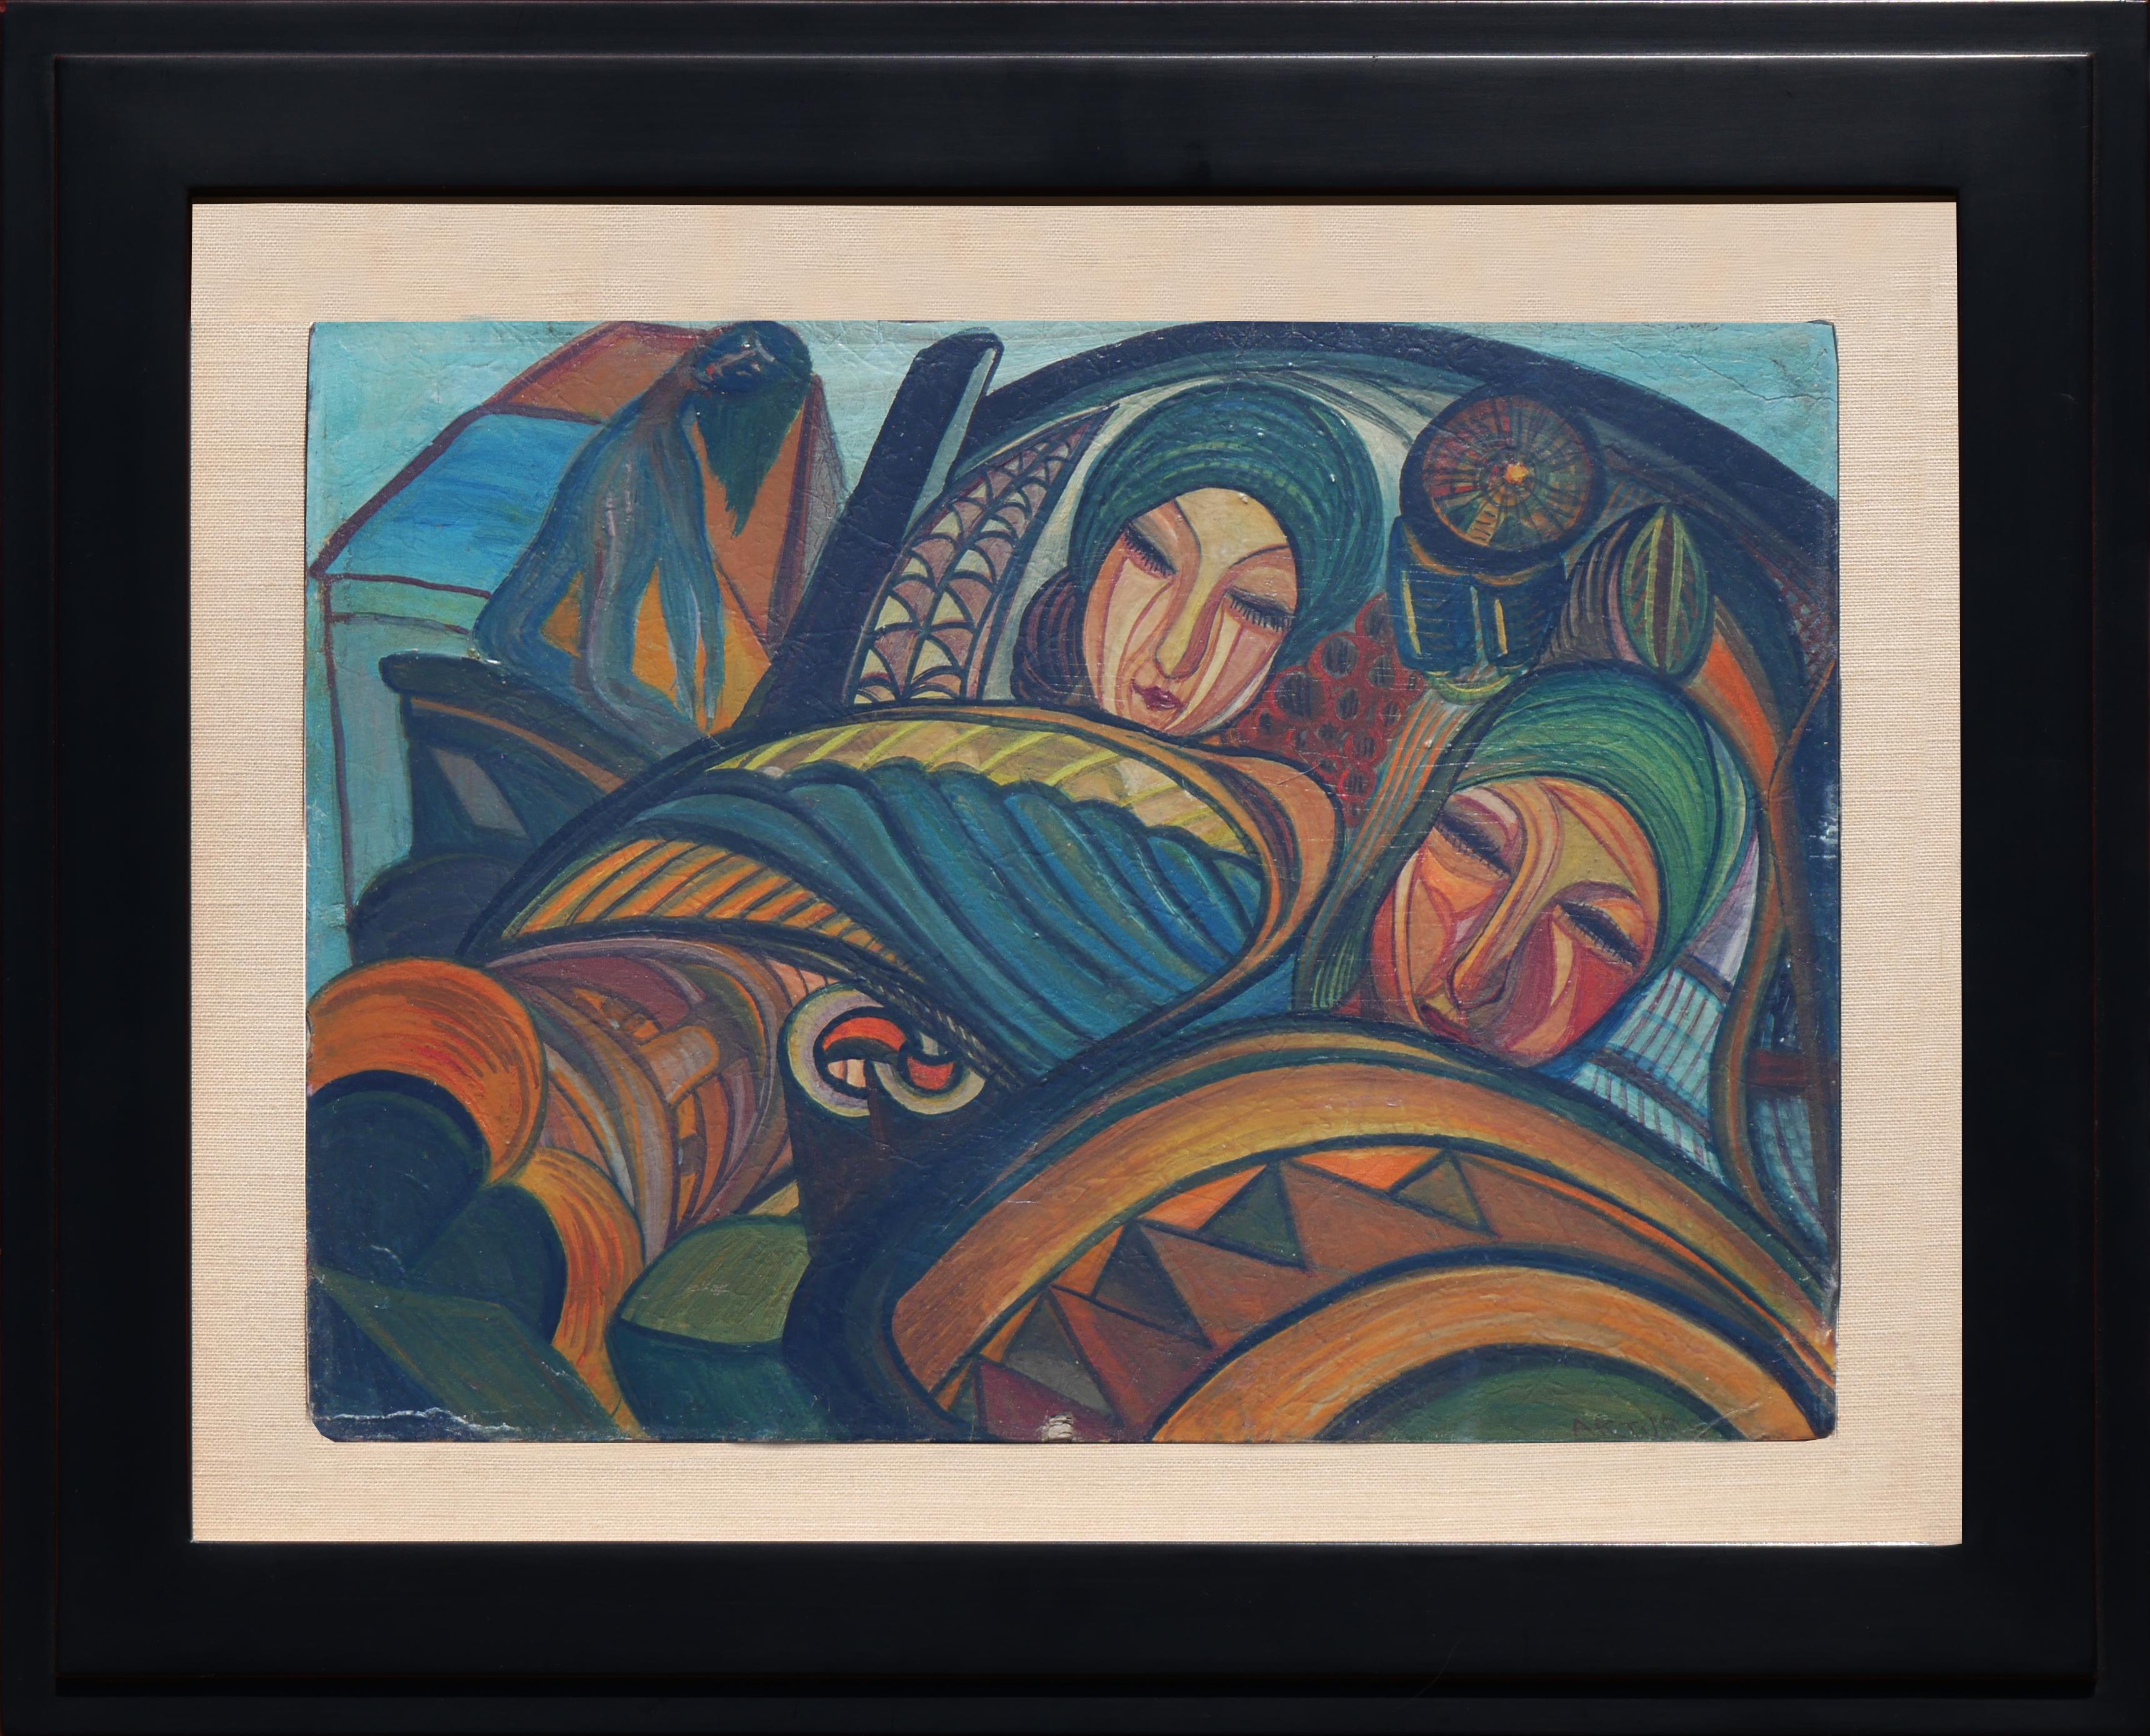 Arturo Abstract Painting - Modern Abstract Earth Toned Cubist Inspired Figurative Harvest Scene Painting